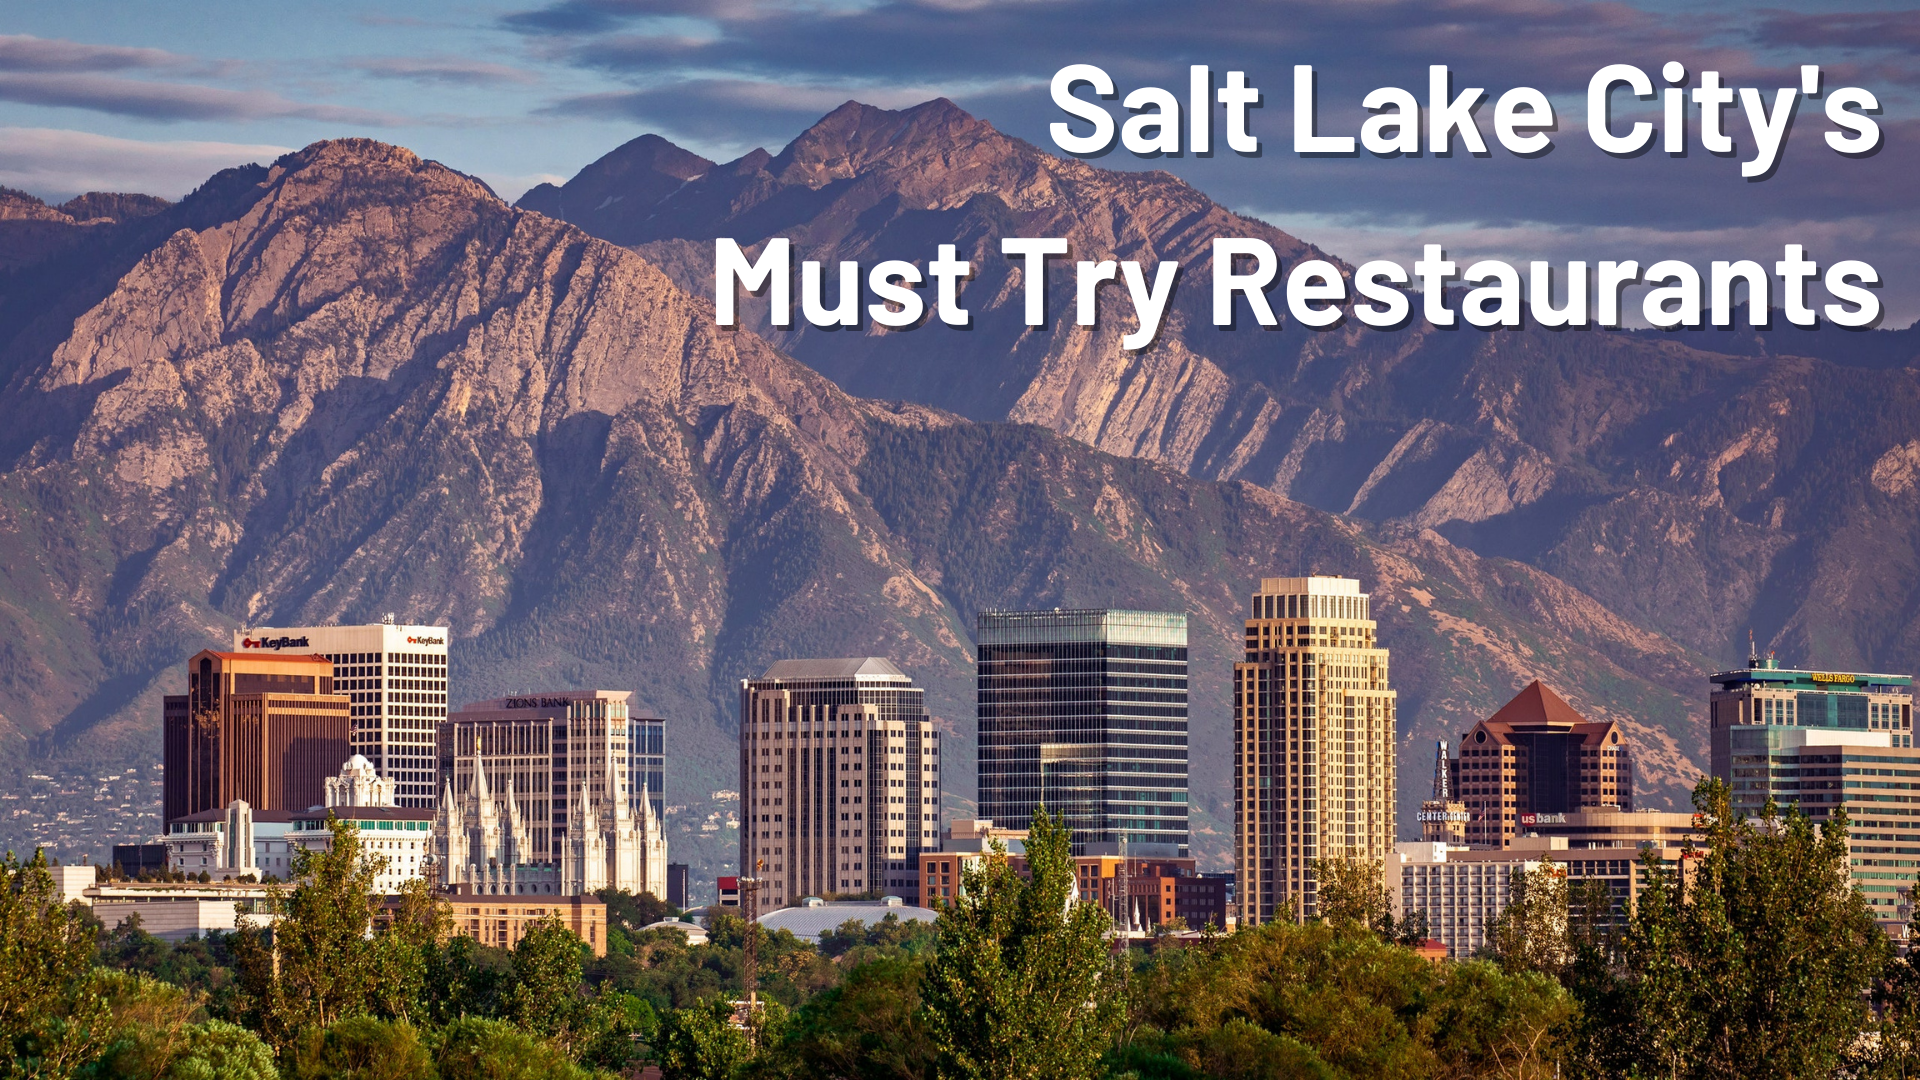 "Salt Lake City's Must Try Restaurants" Pan view of SLC's downtown buildings.